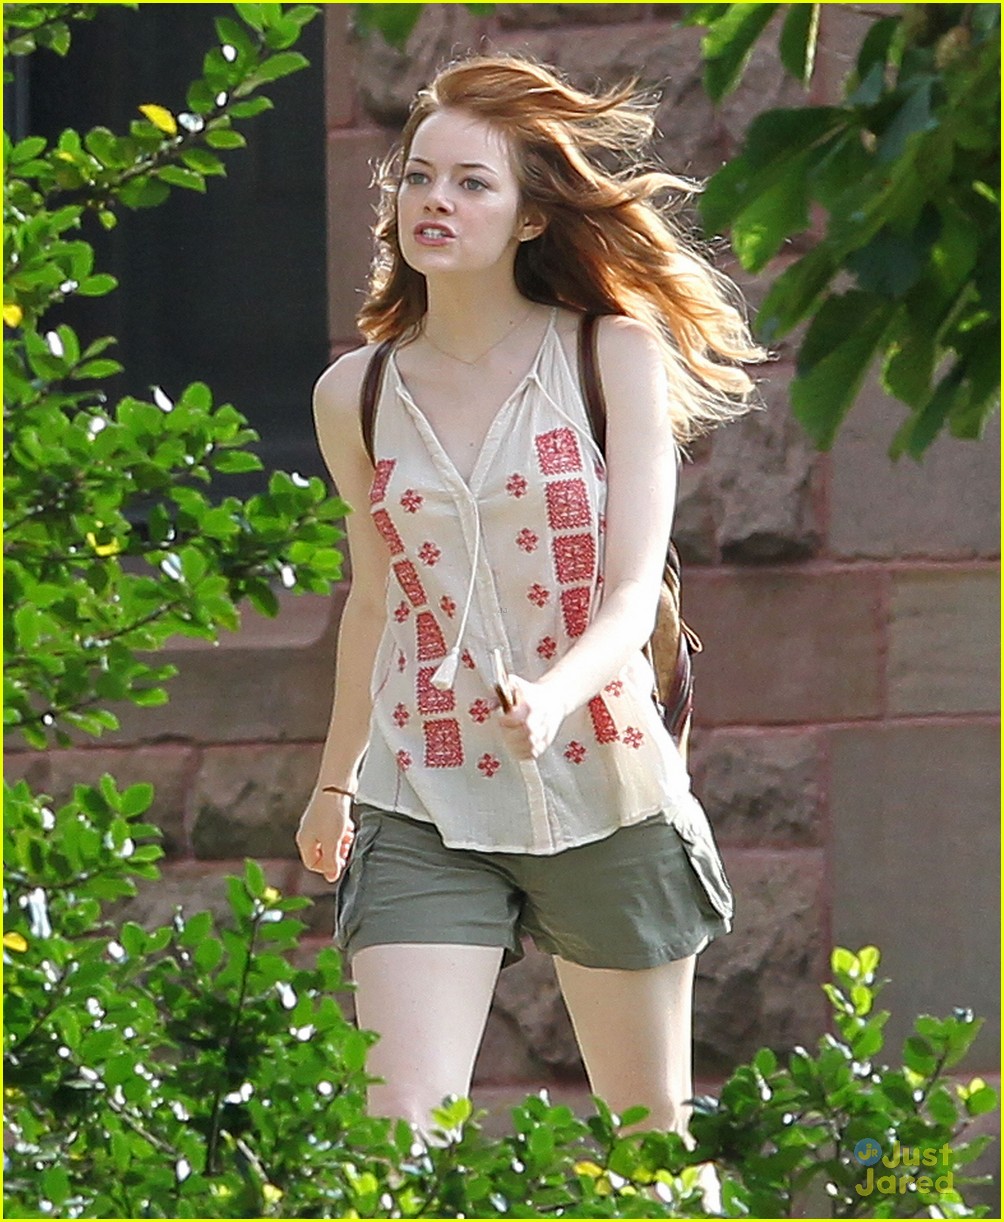 emma stone is having a fit for a scene woody allen film 06